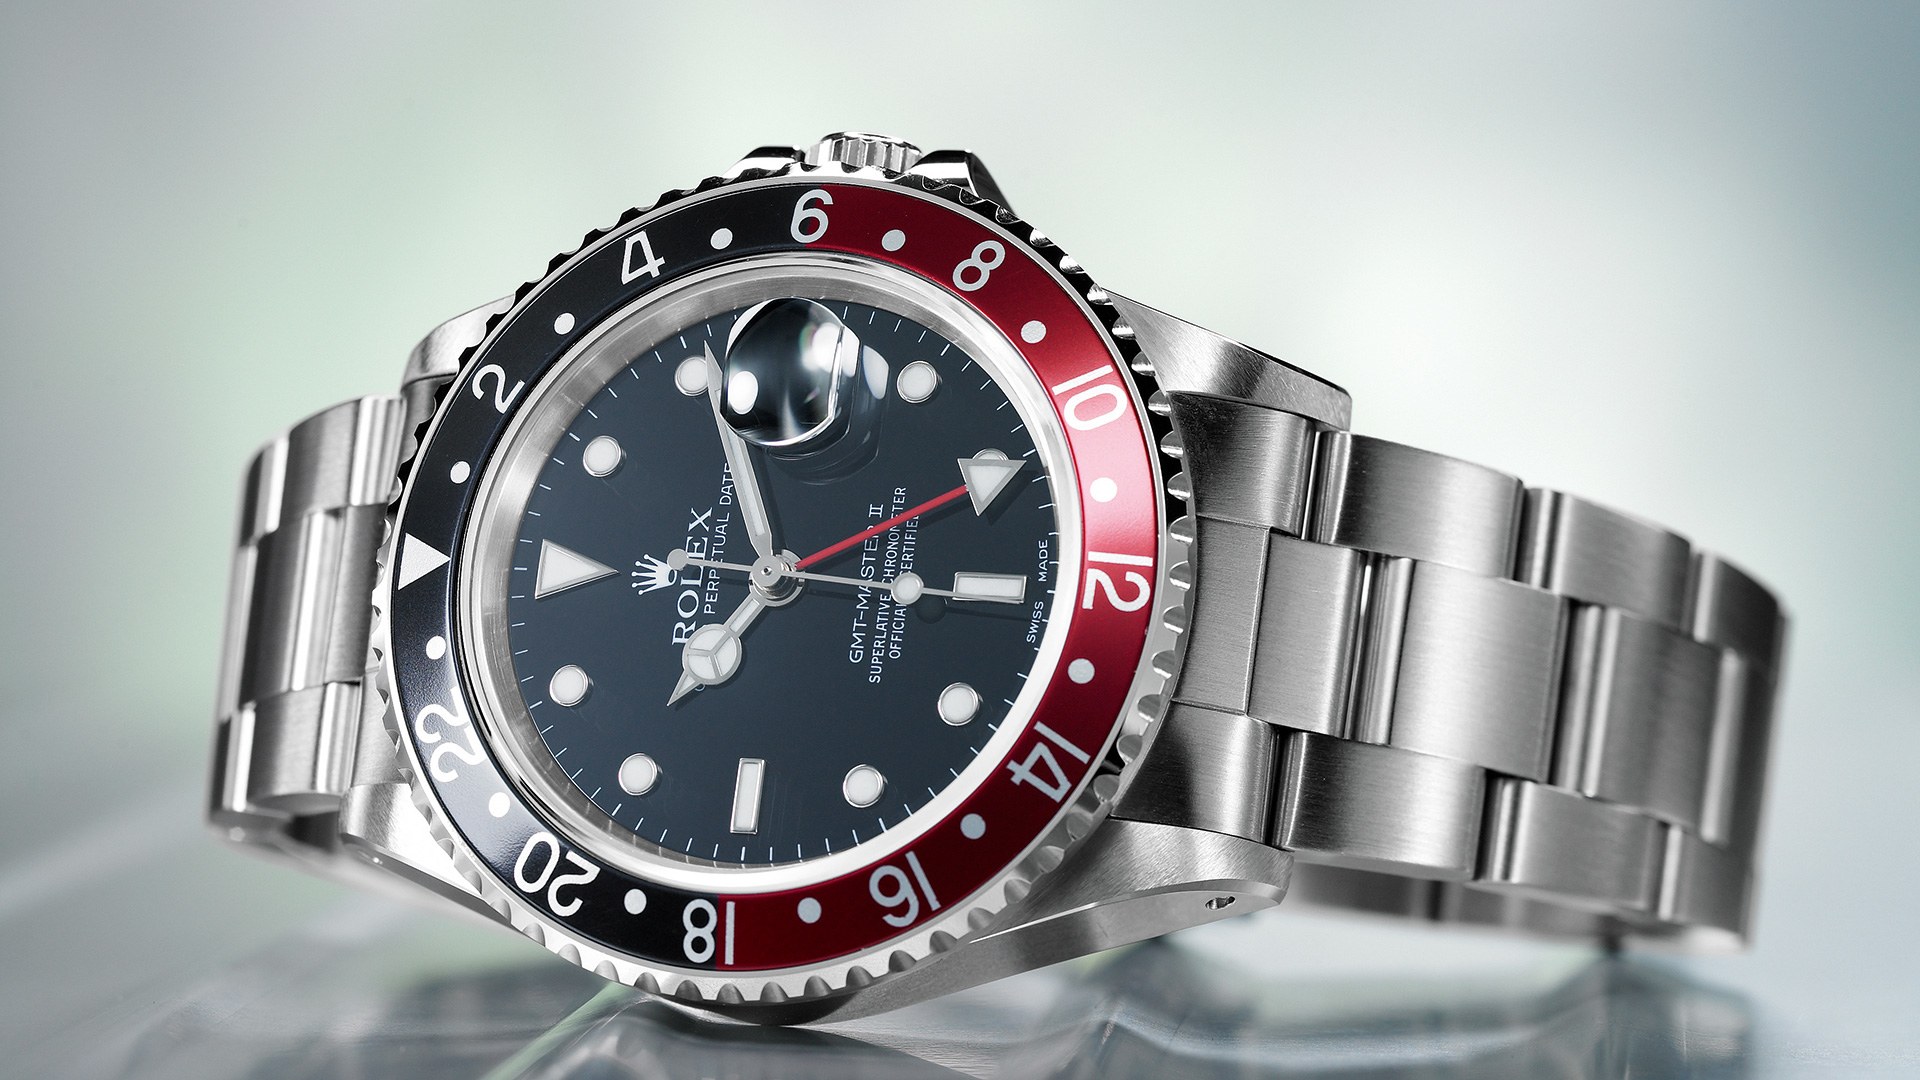 Rolex is increasing its watch prices in 2020 - Luxurylaunches